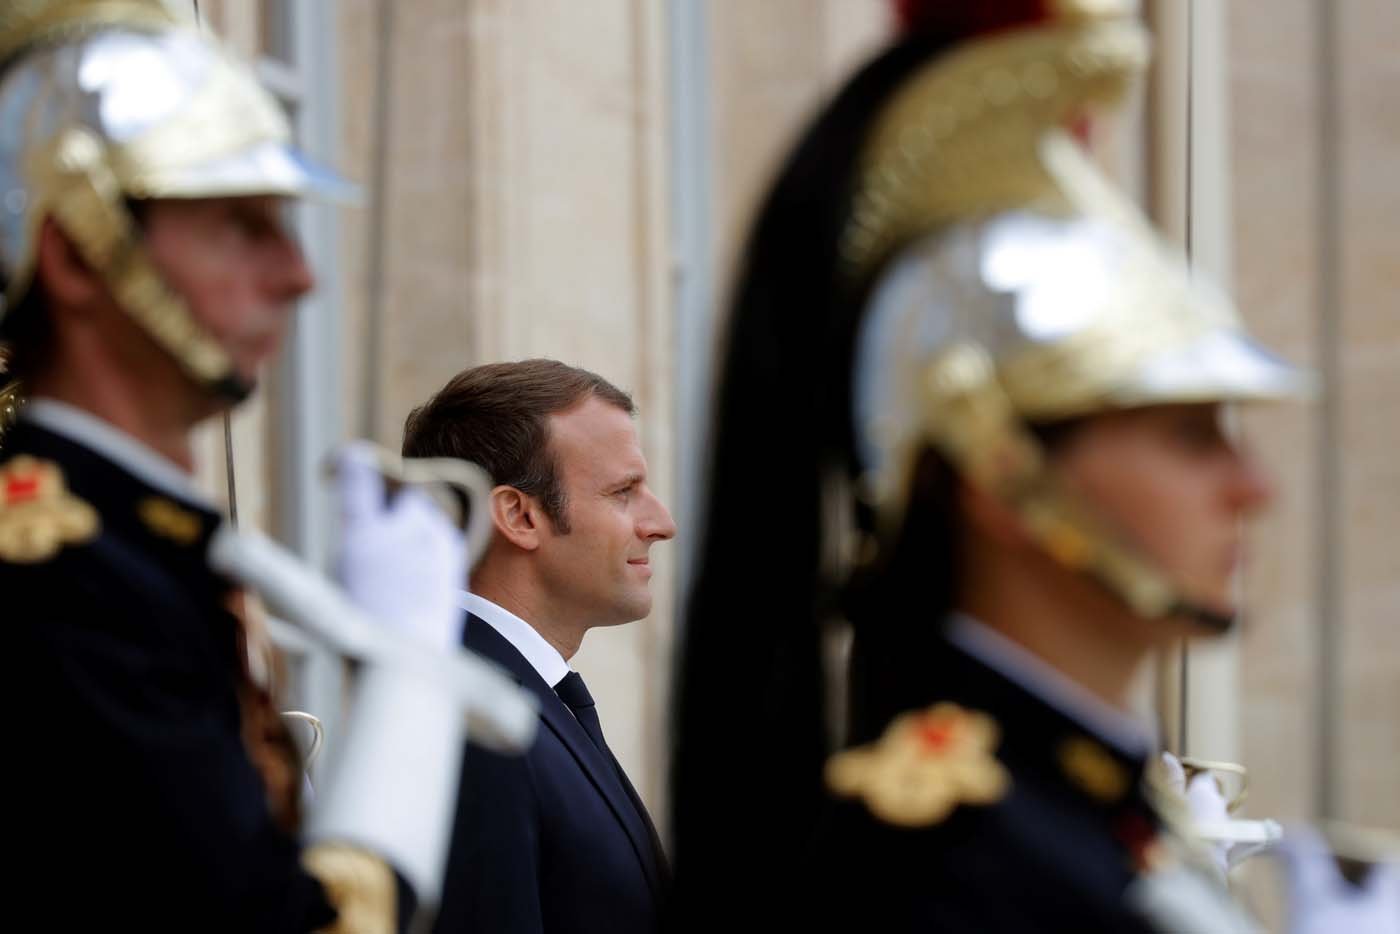 French President Emmanuel Macron waits for guests at the Elysee Palace in Paris, France, August 31, 2017. REUTERS/Philippe Wojazer